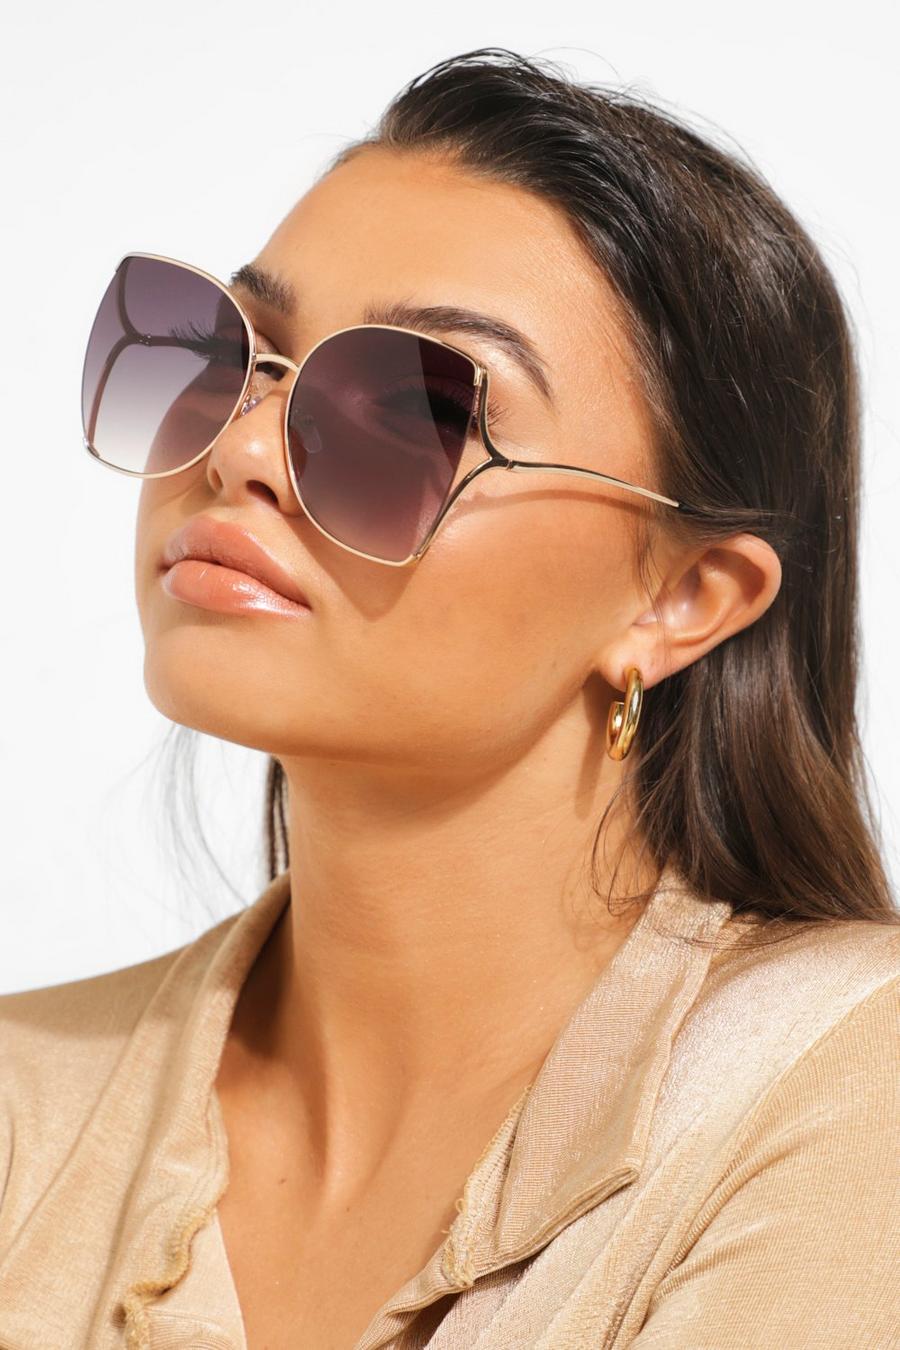 Gold Brought the sunglasses for my wife she loves the style the look fit she now has two pairs